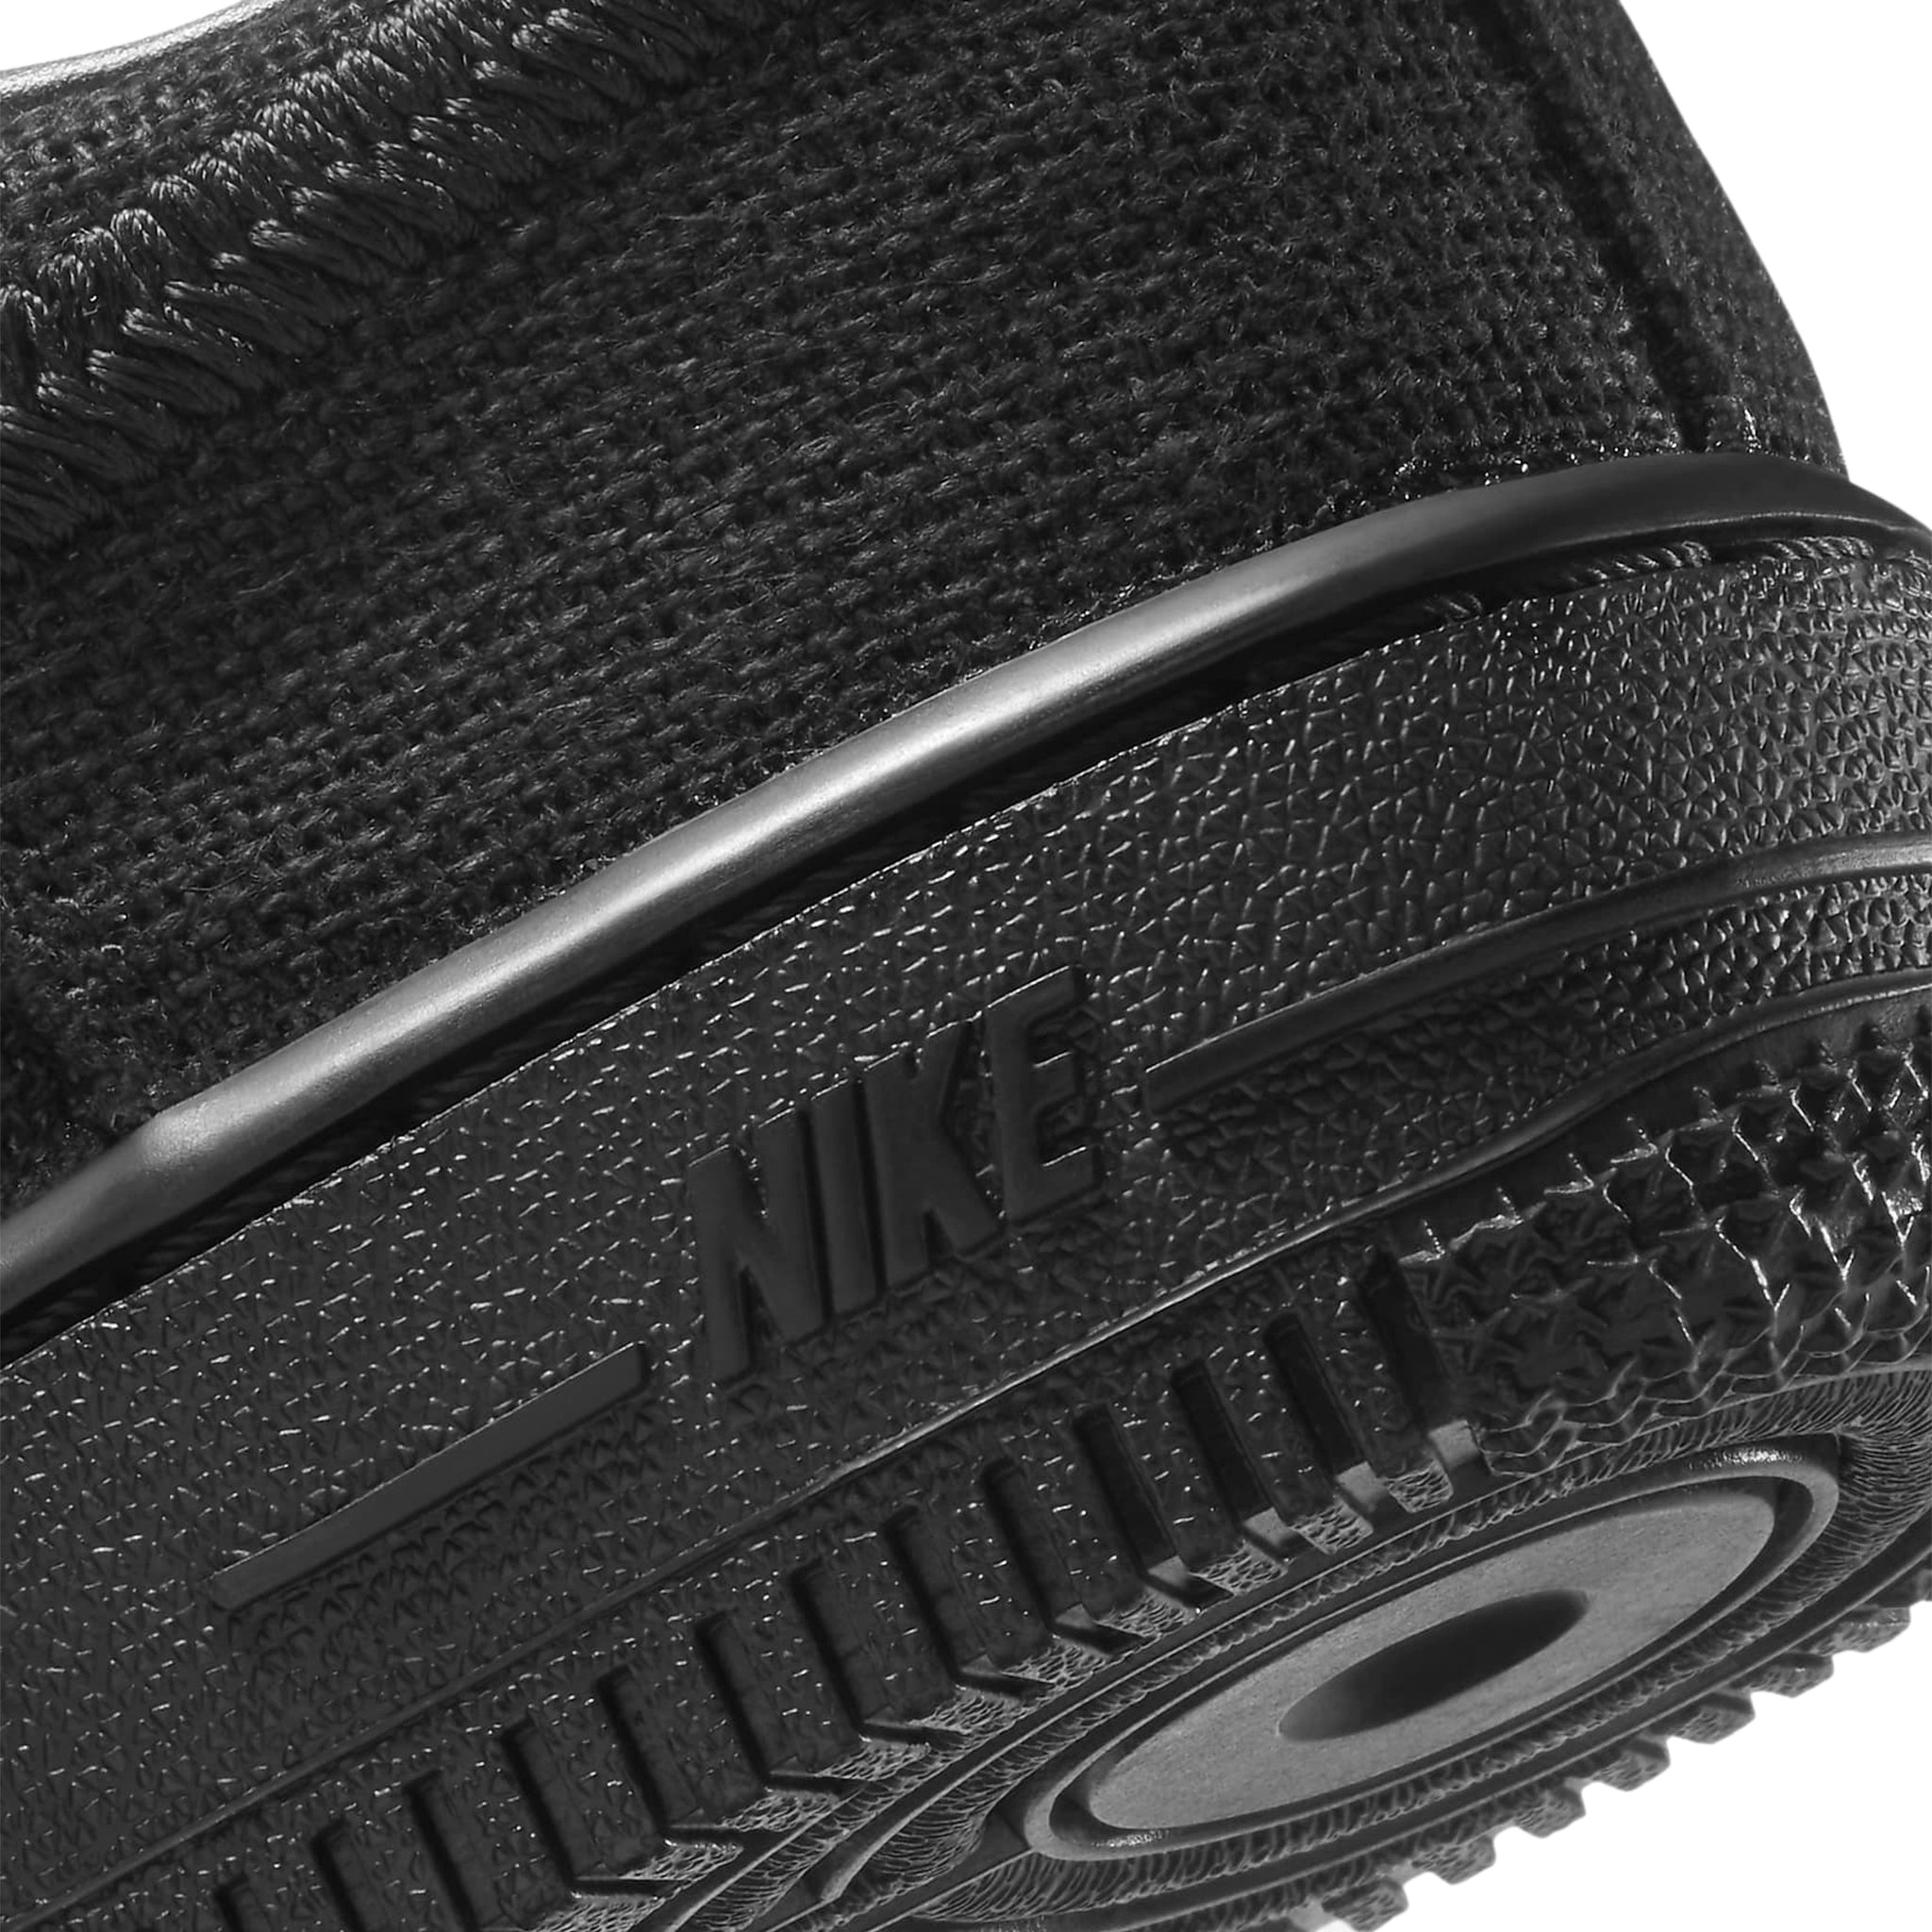 Heel view of Stussy x Nike Air Force 1 Low Black (PS) DD1578-001